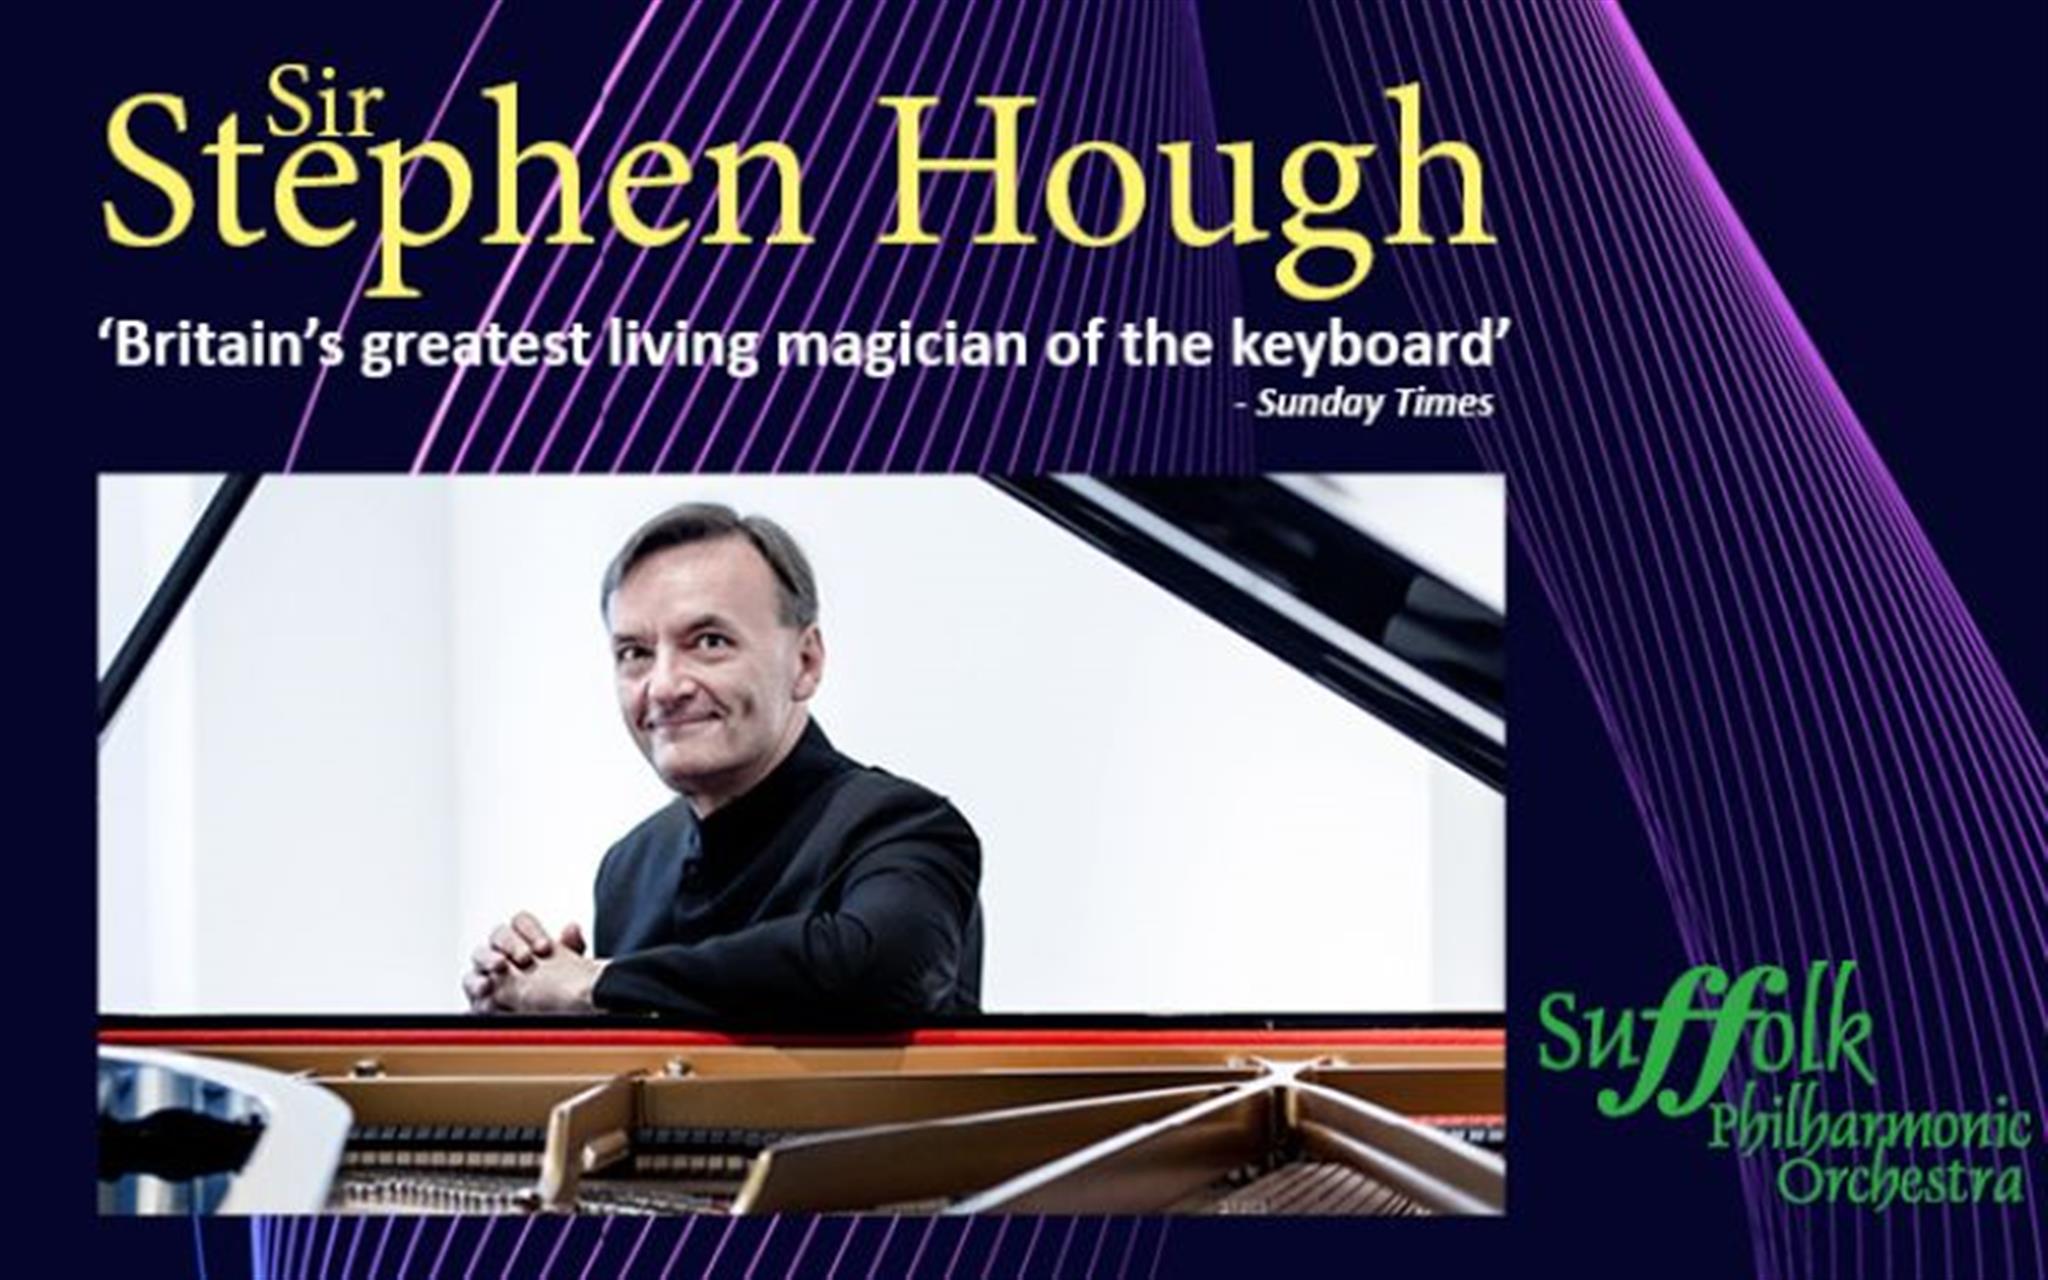 Suffolk Phil and Sir Stephen Hough image